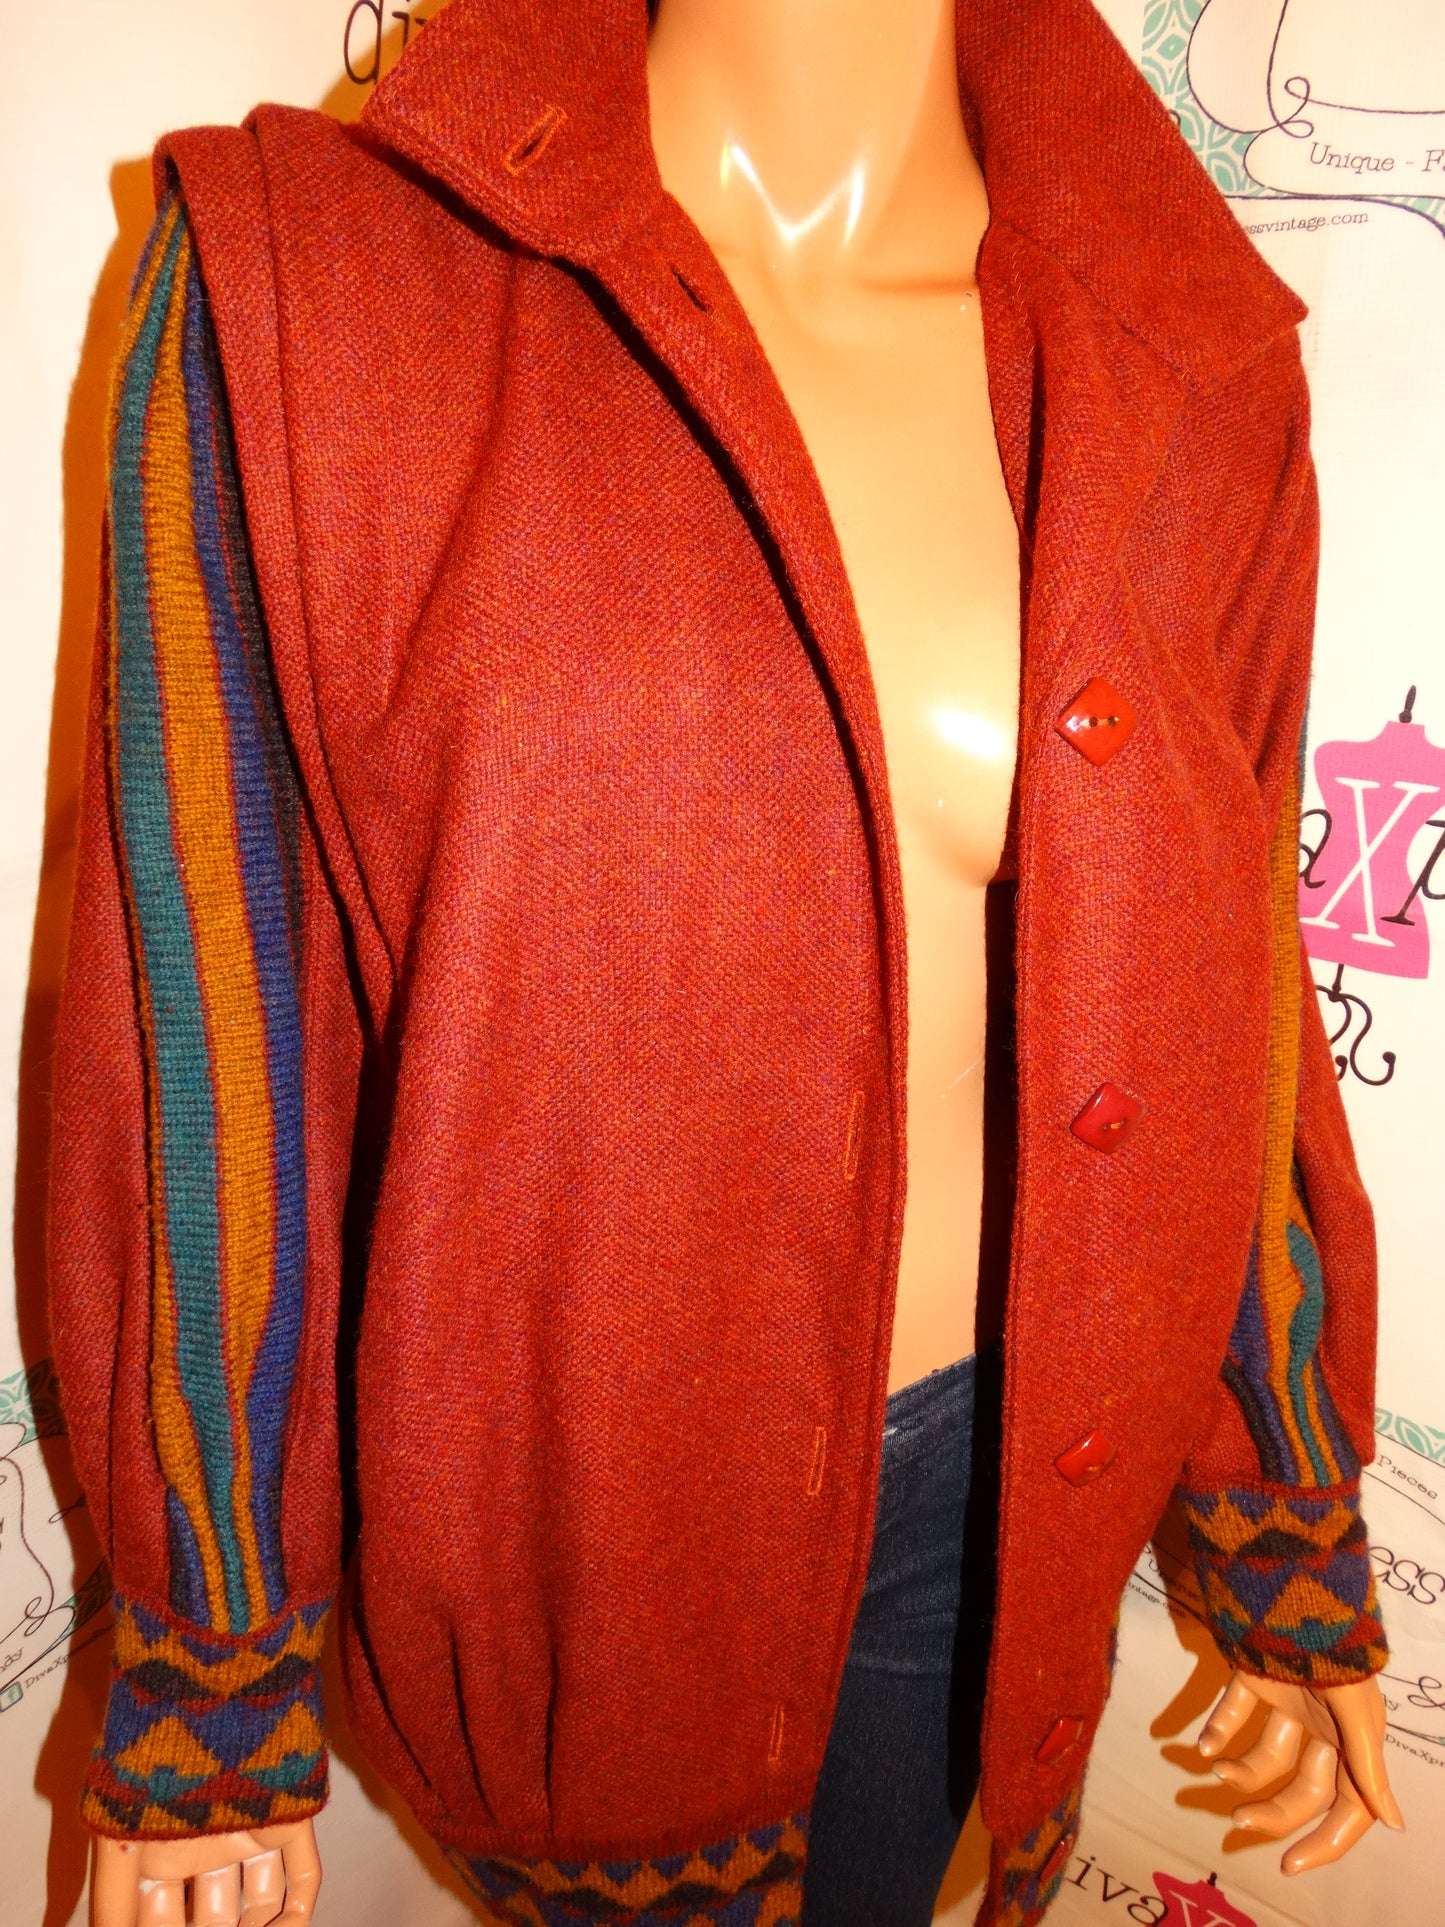 Vintage ragamuffin Coral Colorful Sleve Sweater Jacket Size XL